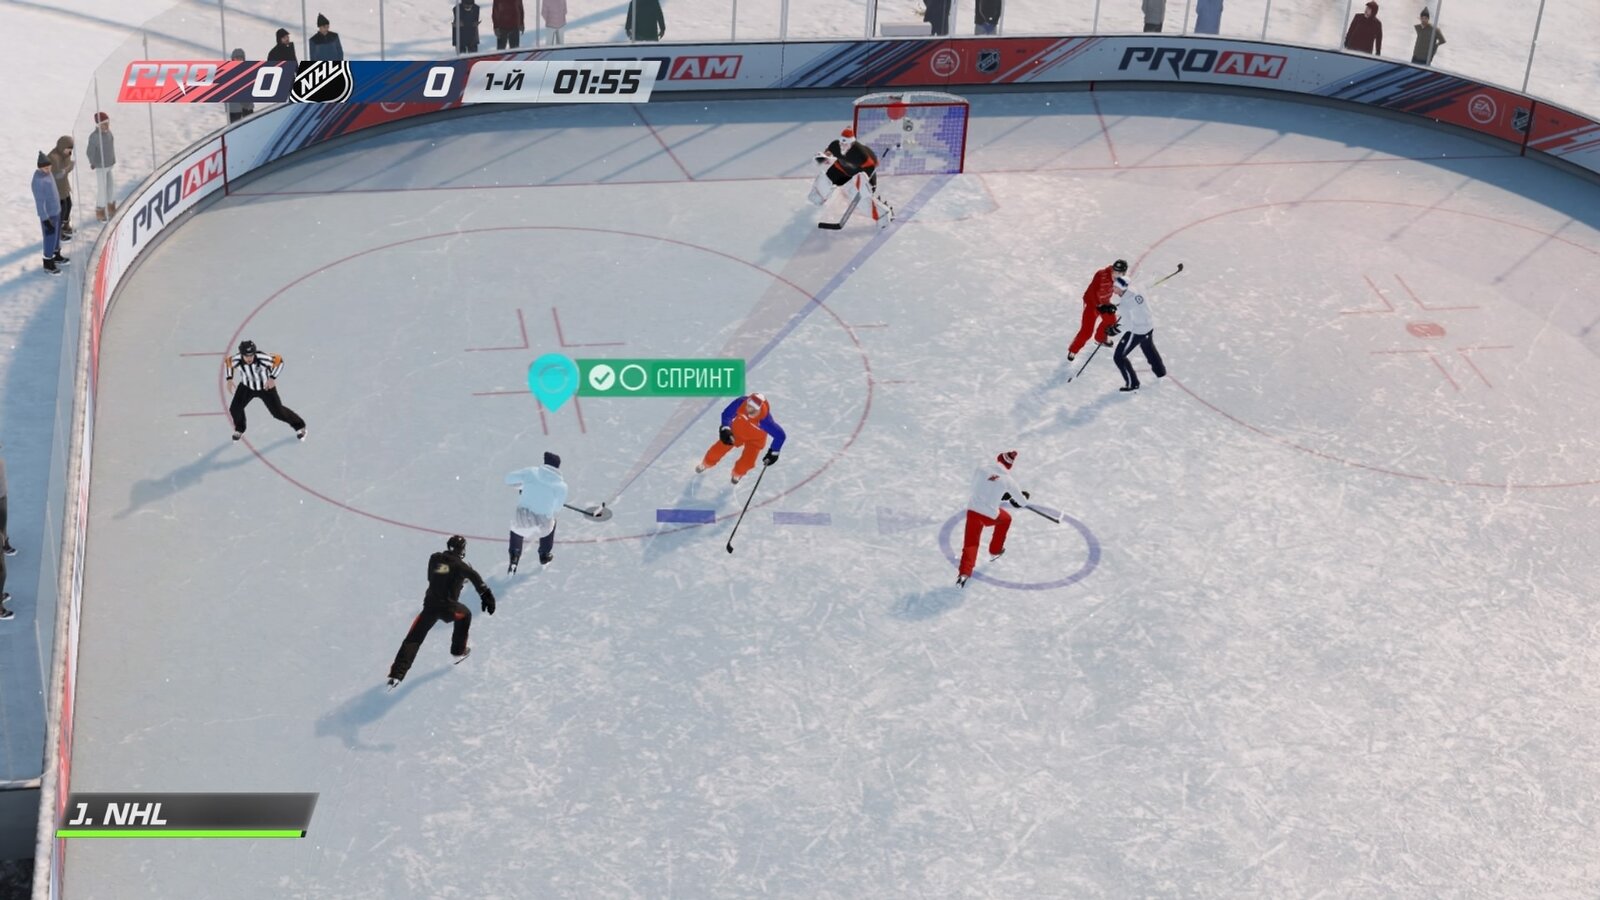 NHL 20 - Deluxe Edition